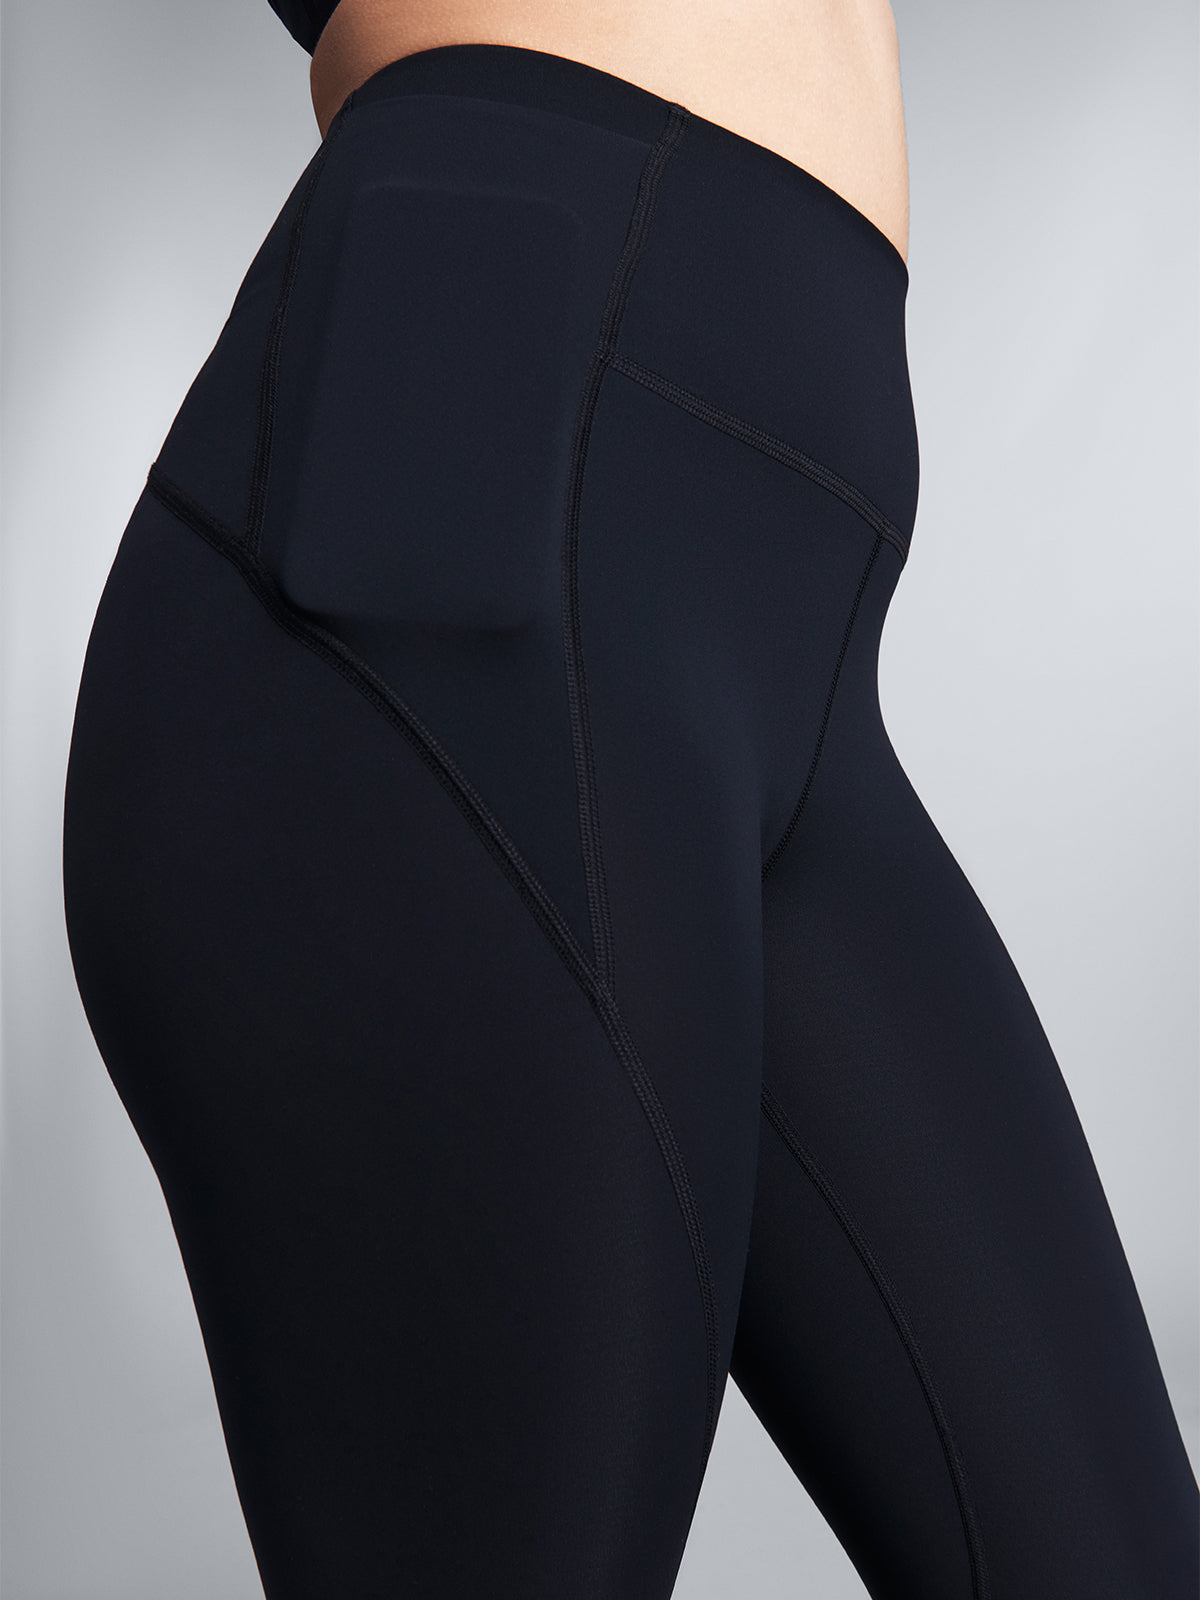 Lululemon All The Right Places Pant Iii